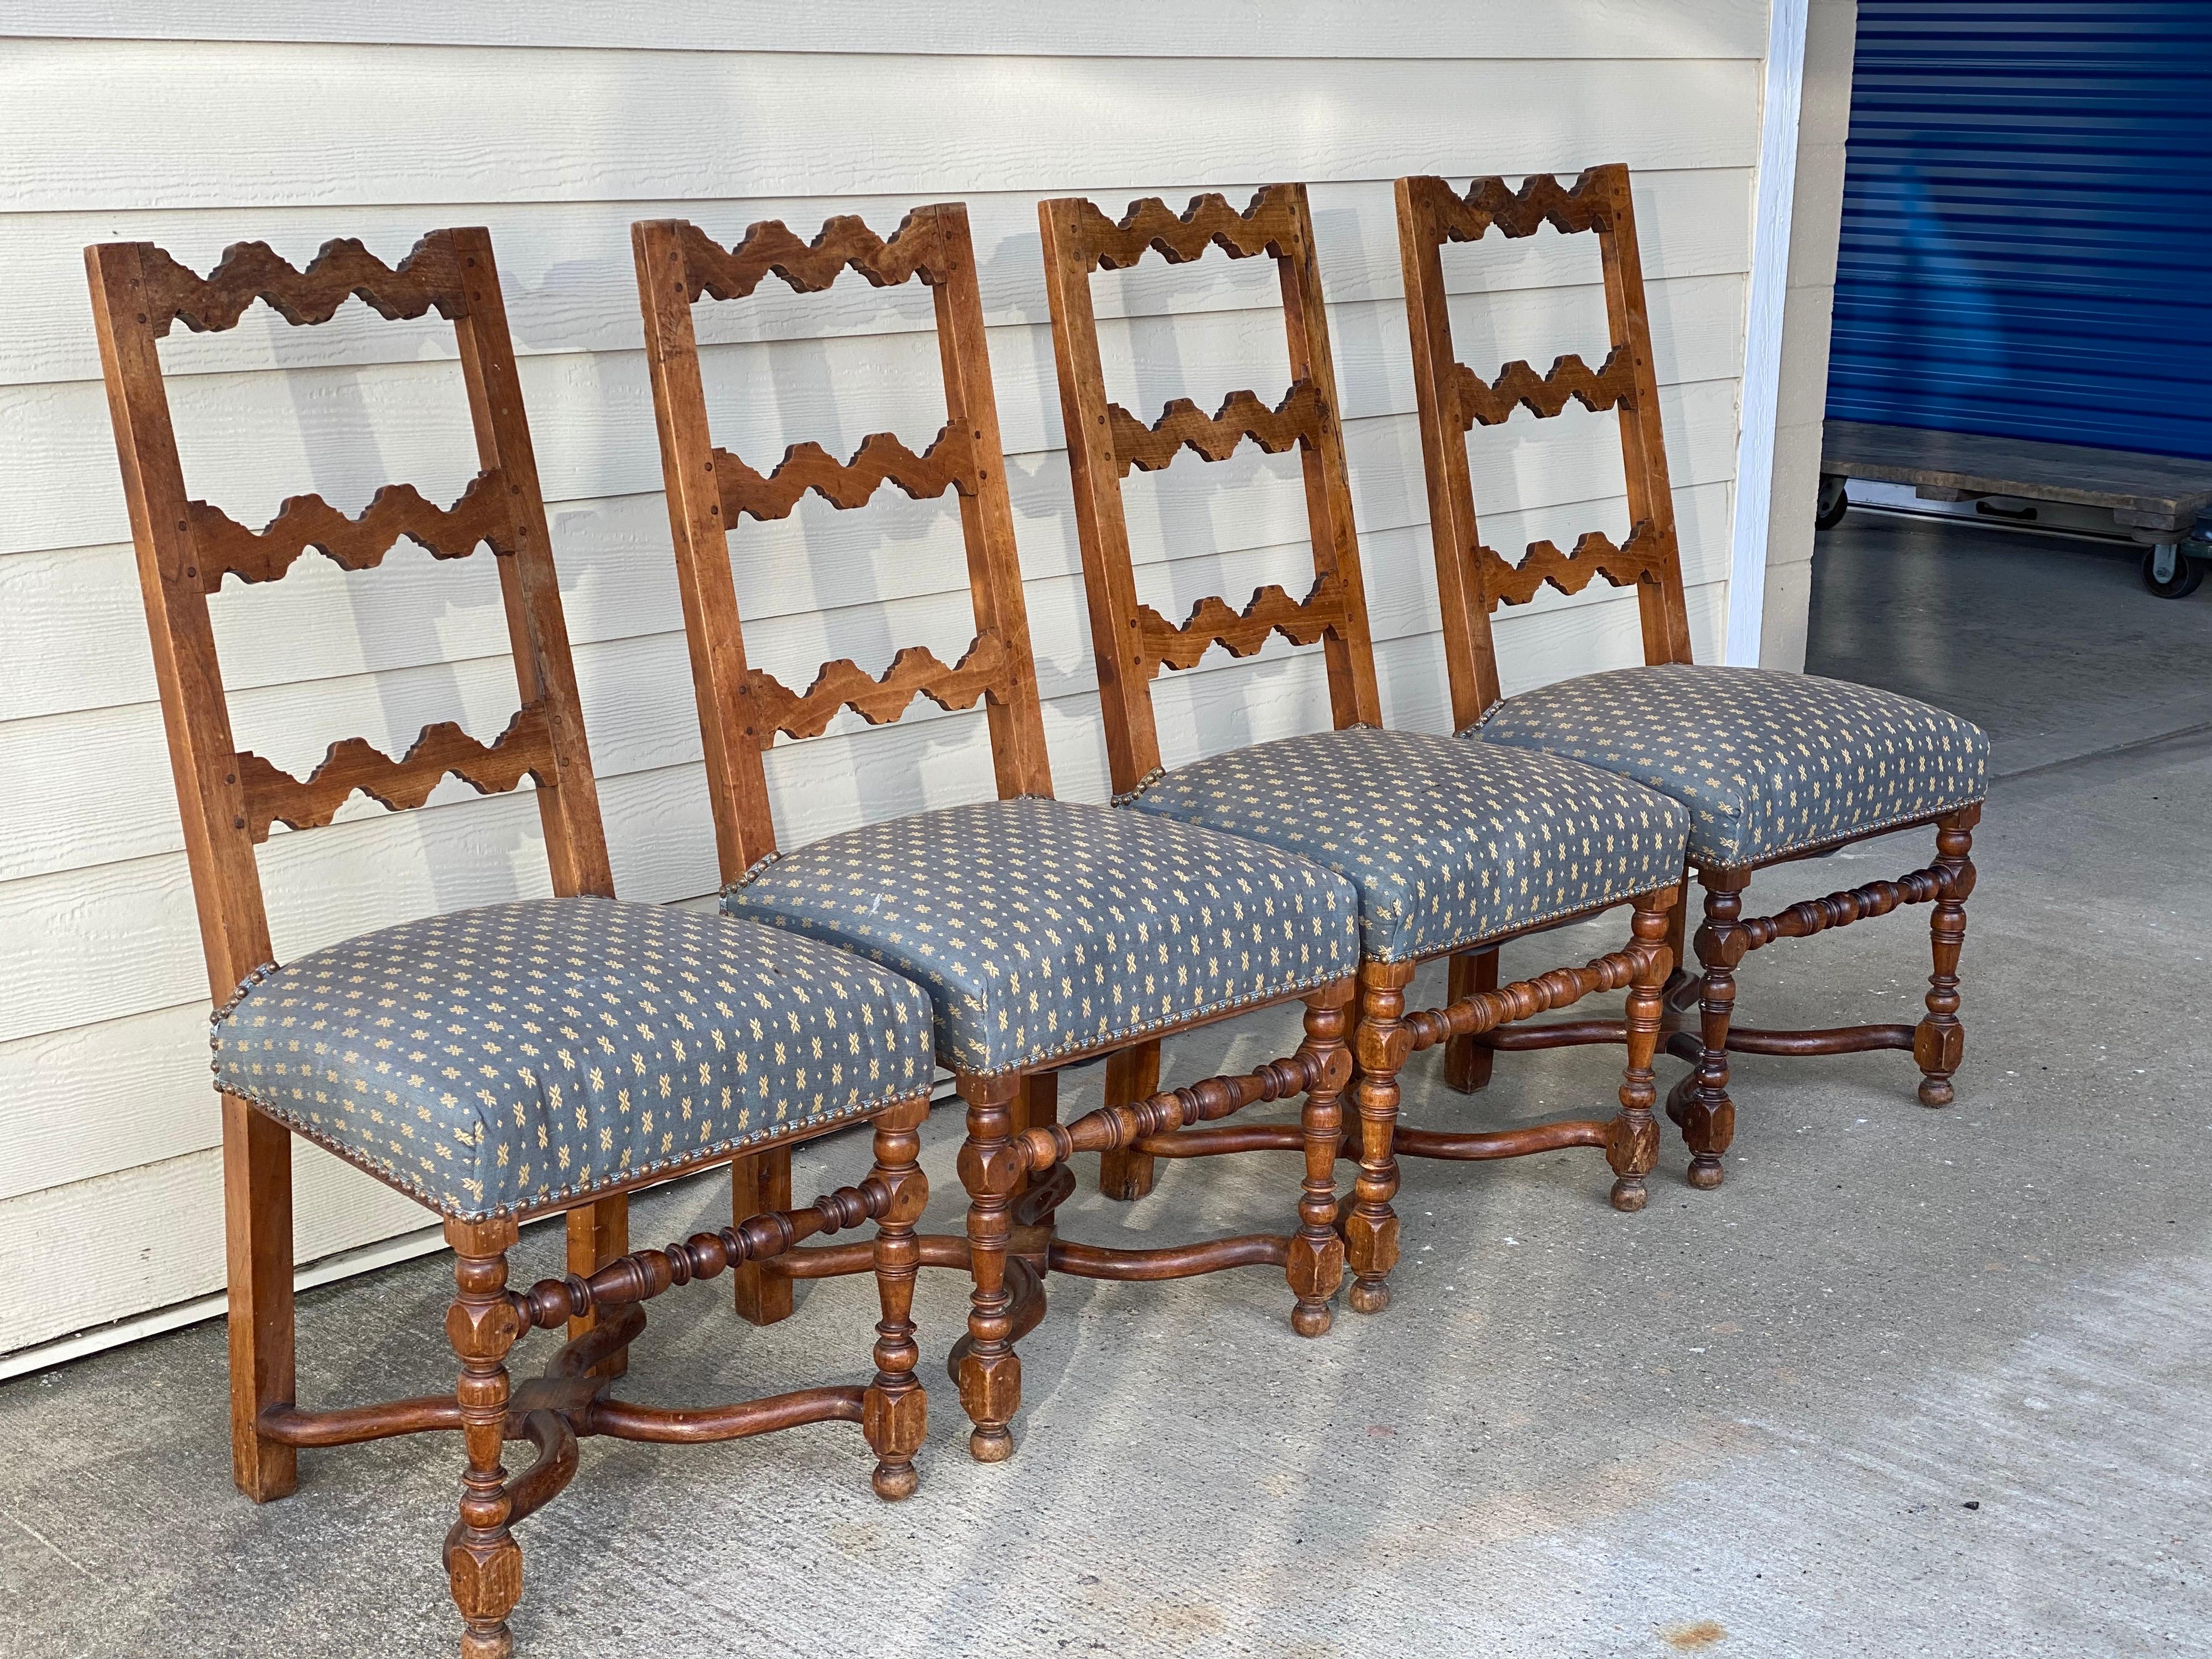 Set of four Rustic style oak ladder back side chairs, early 20th century
An unusual set of chairs with the zig zag backs, turned legs and beautiful curved x stretchers. A fresh fun fabric would update these chairs significantly. Some loss underside